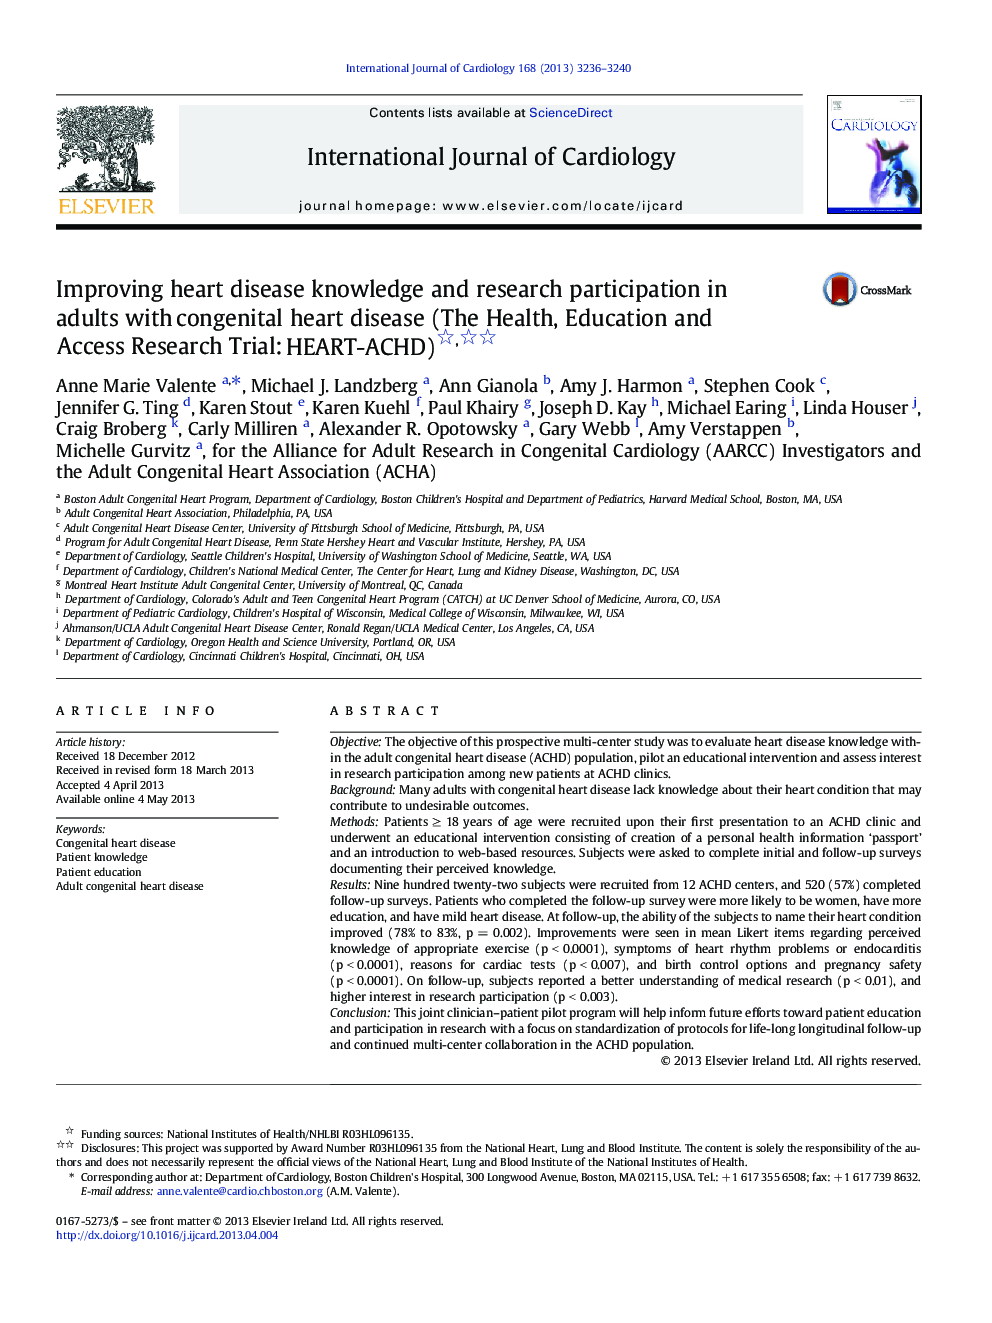 Improving heart disease knowledge and research participation in adults with congenital heart disease (The Health, Education and Access Research Trial: HEART-ACHD)